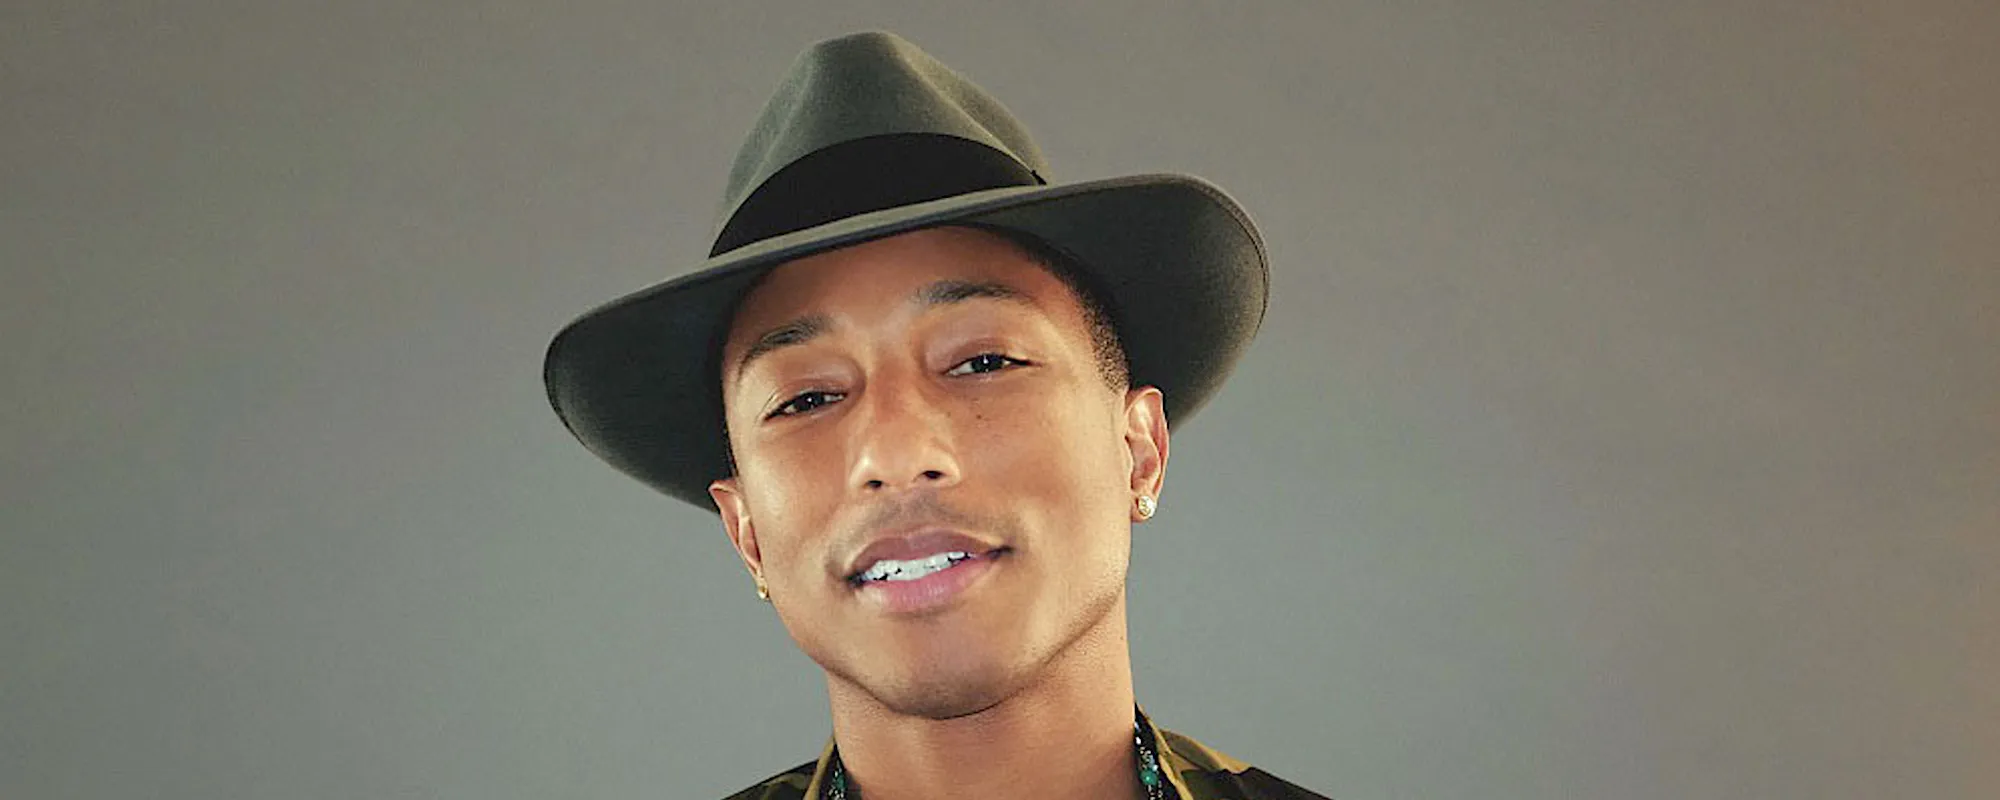 10 Songs You Didn’t Know Pharrell Williams Wrote For Other Artists